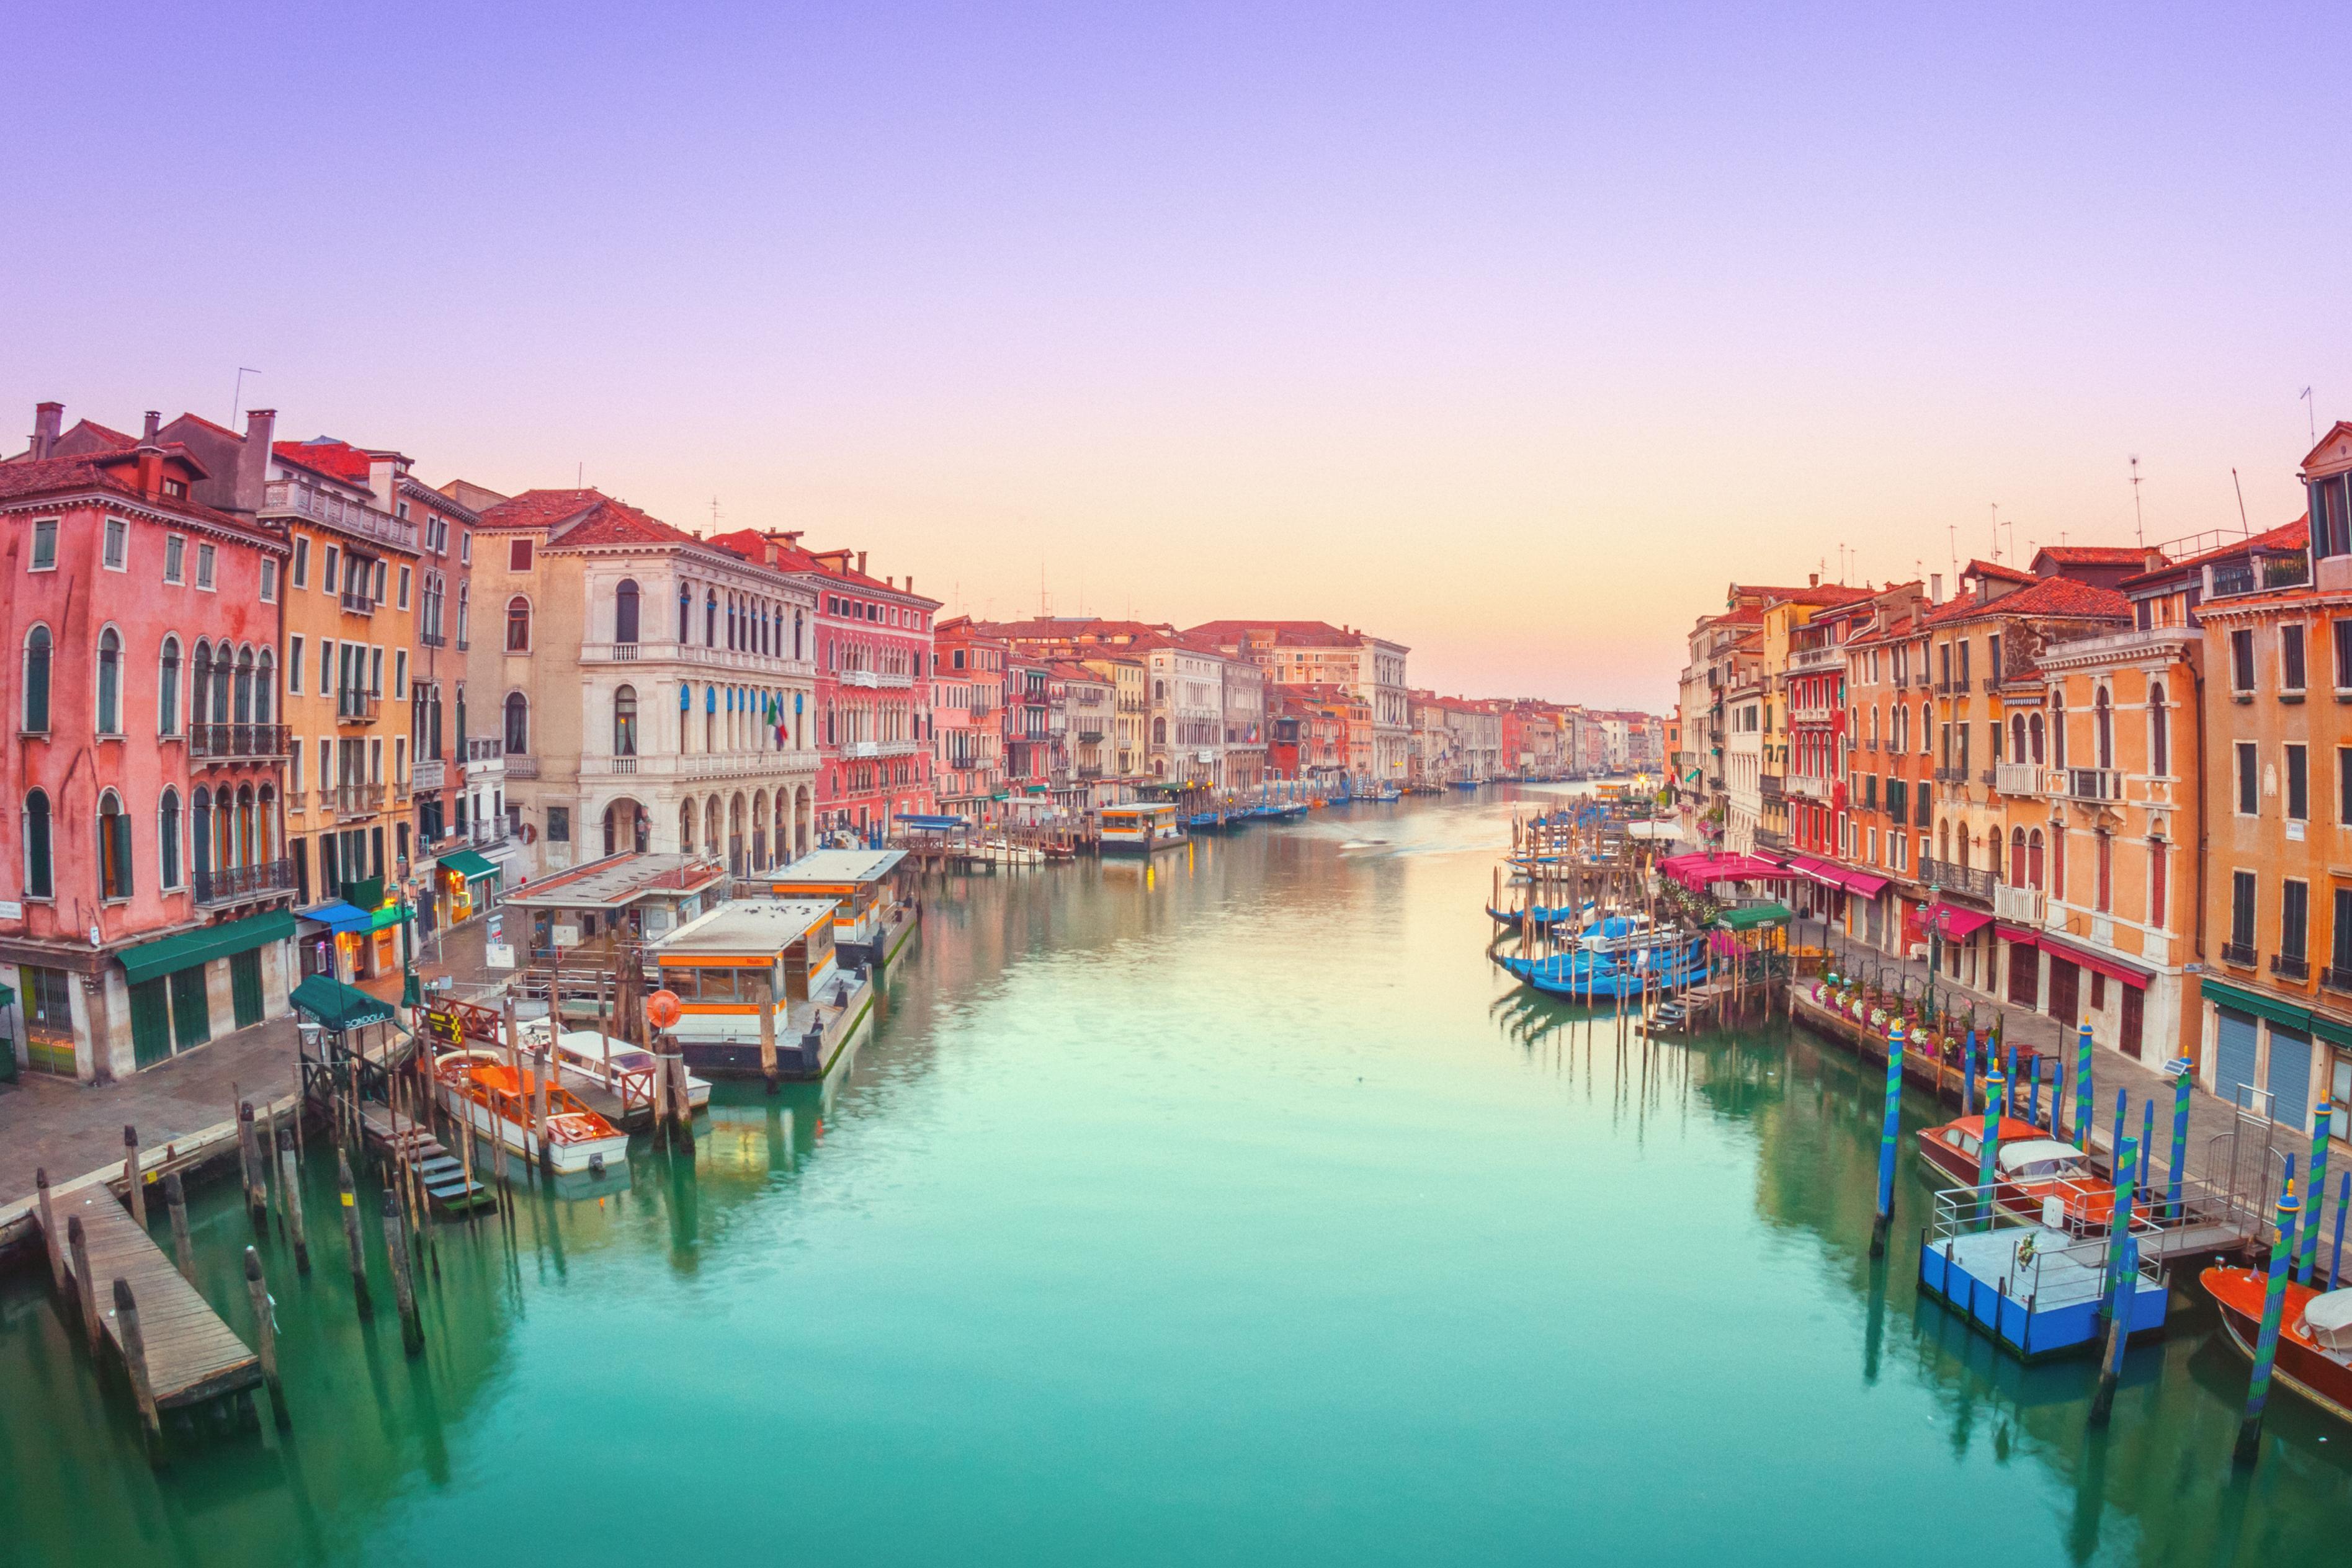 Grand Canal Image, Canal, Colorful, Grand, Hd, Sky, Stunning, World